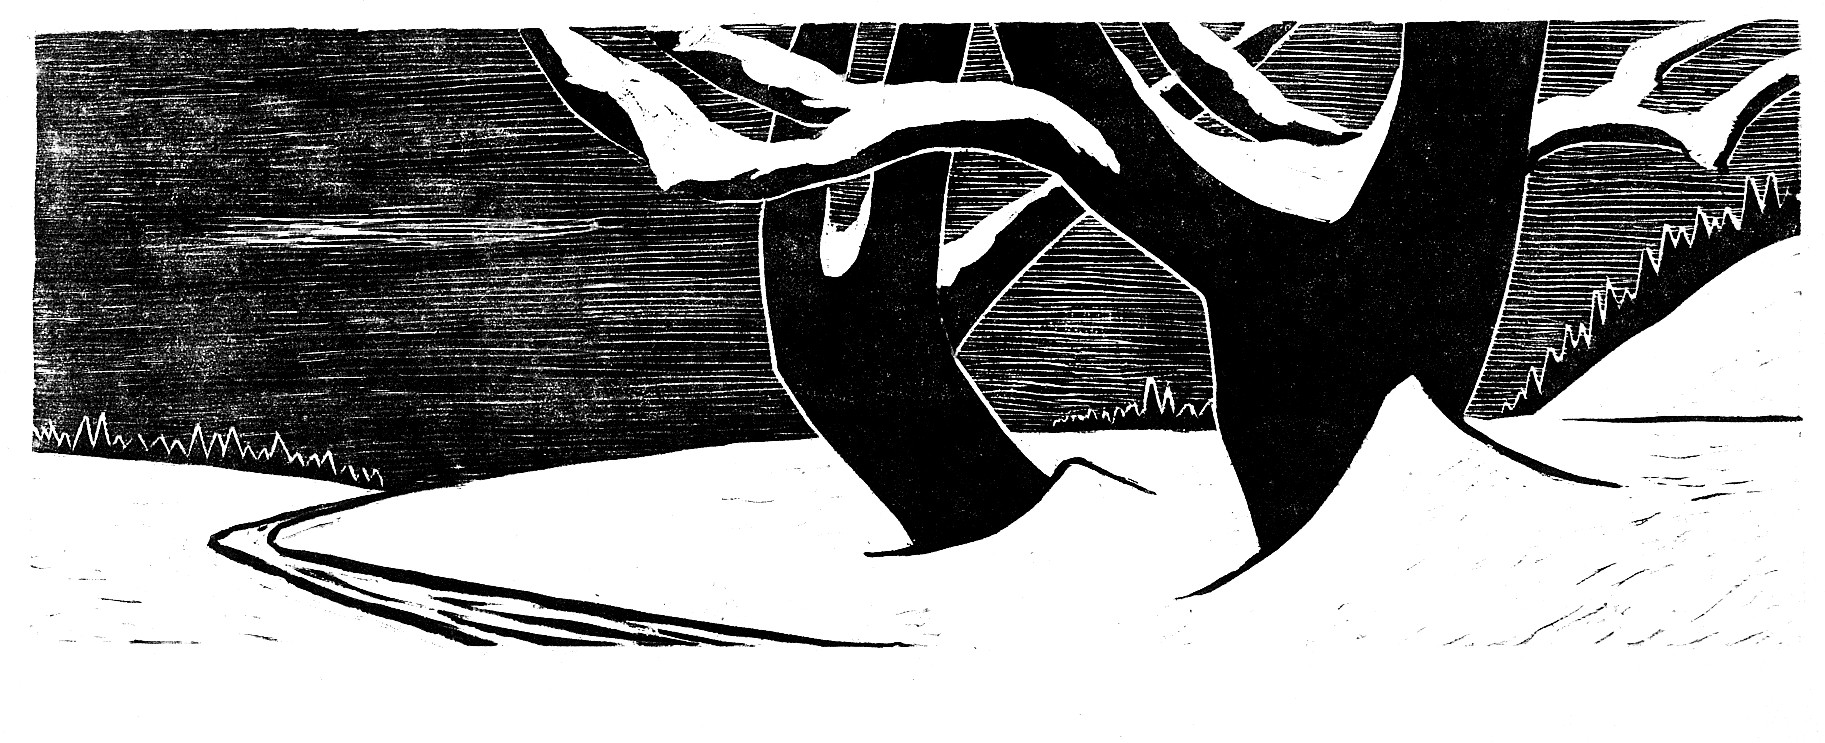 Werner Berg, Schnee, 1981, woodcut, 22x61cm, signed and titled, WVWB 538